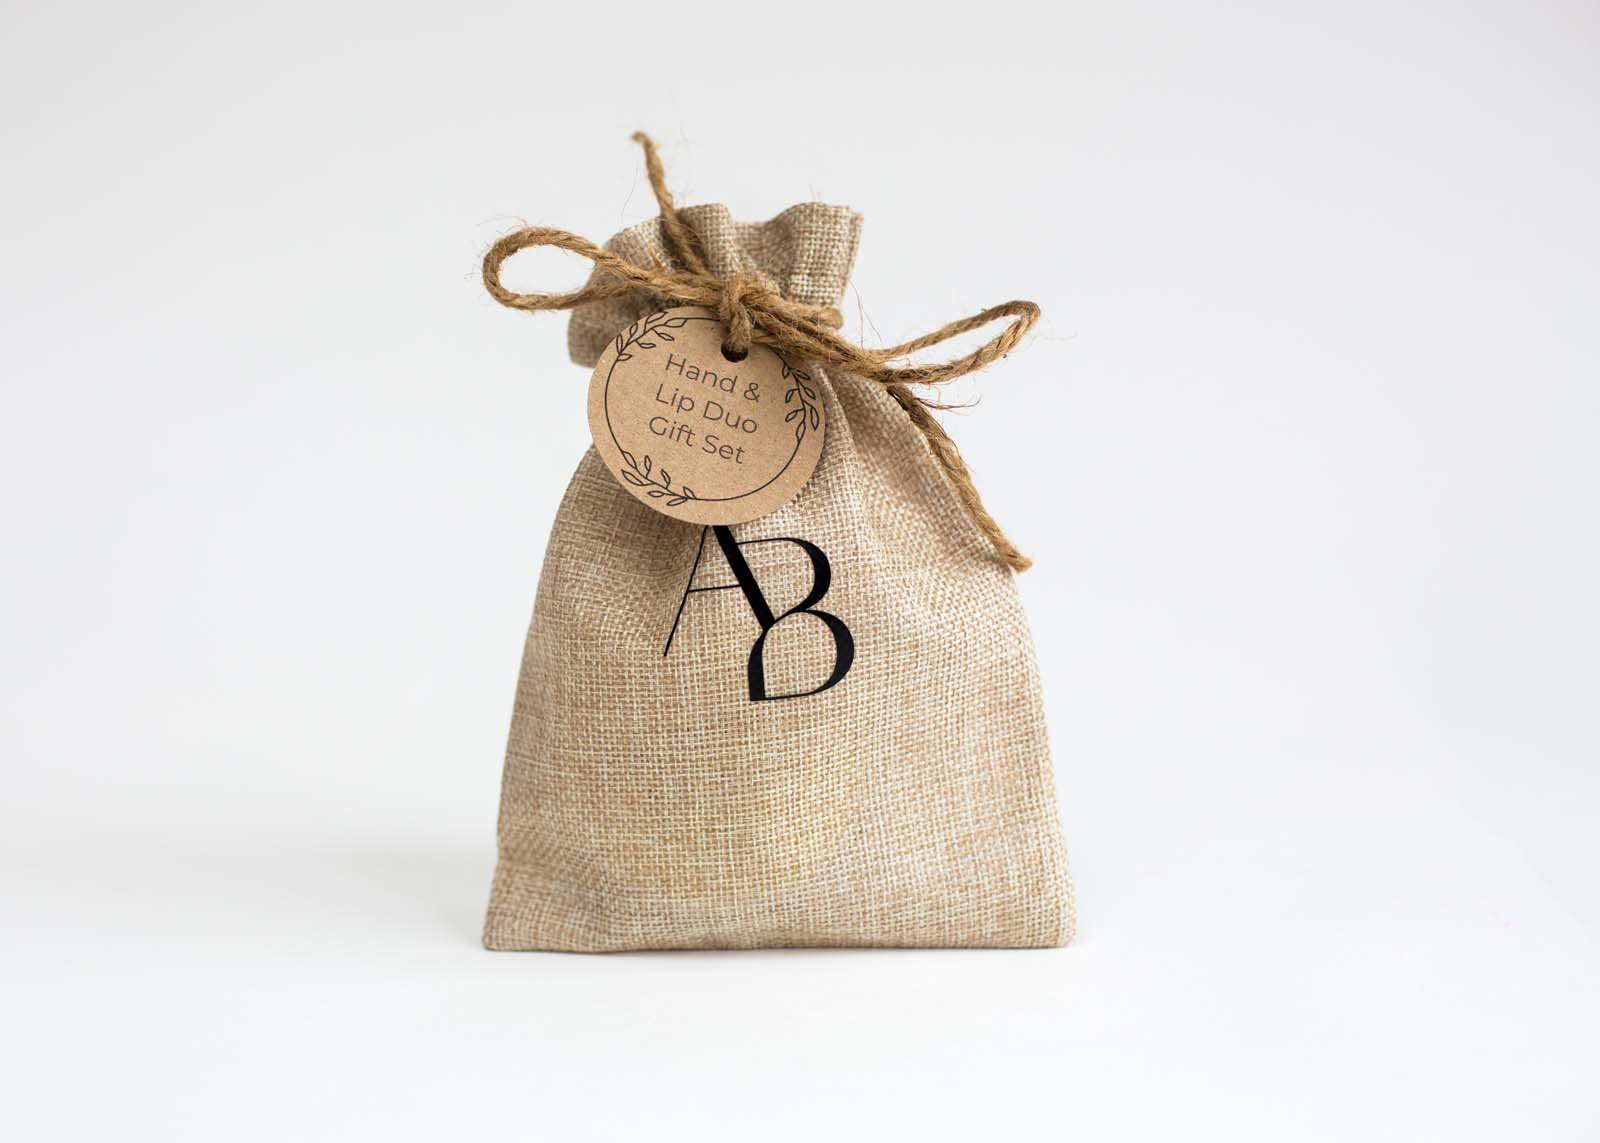 Branded Awesome botanical hessian bag with gift tag on white background